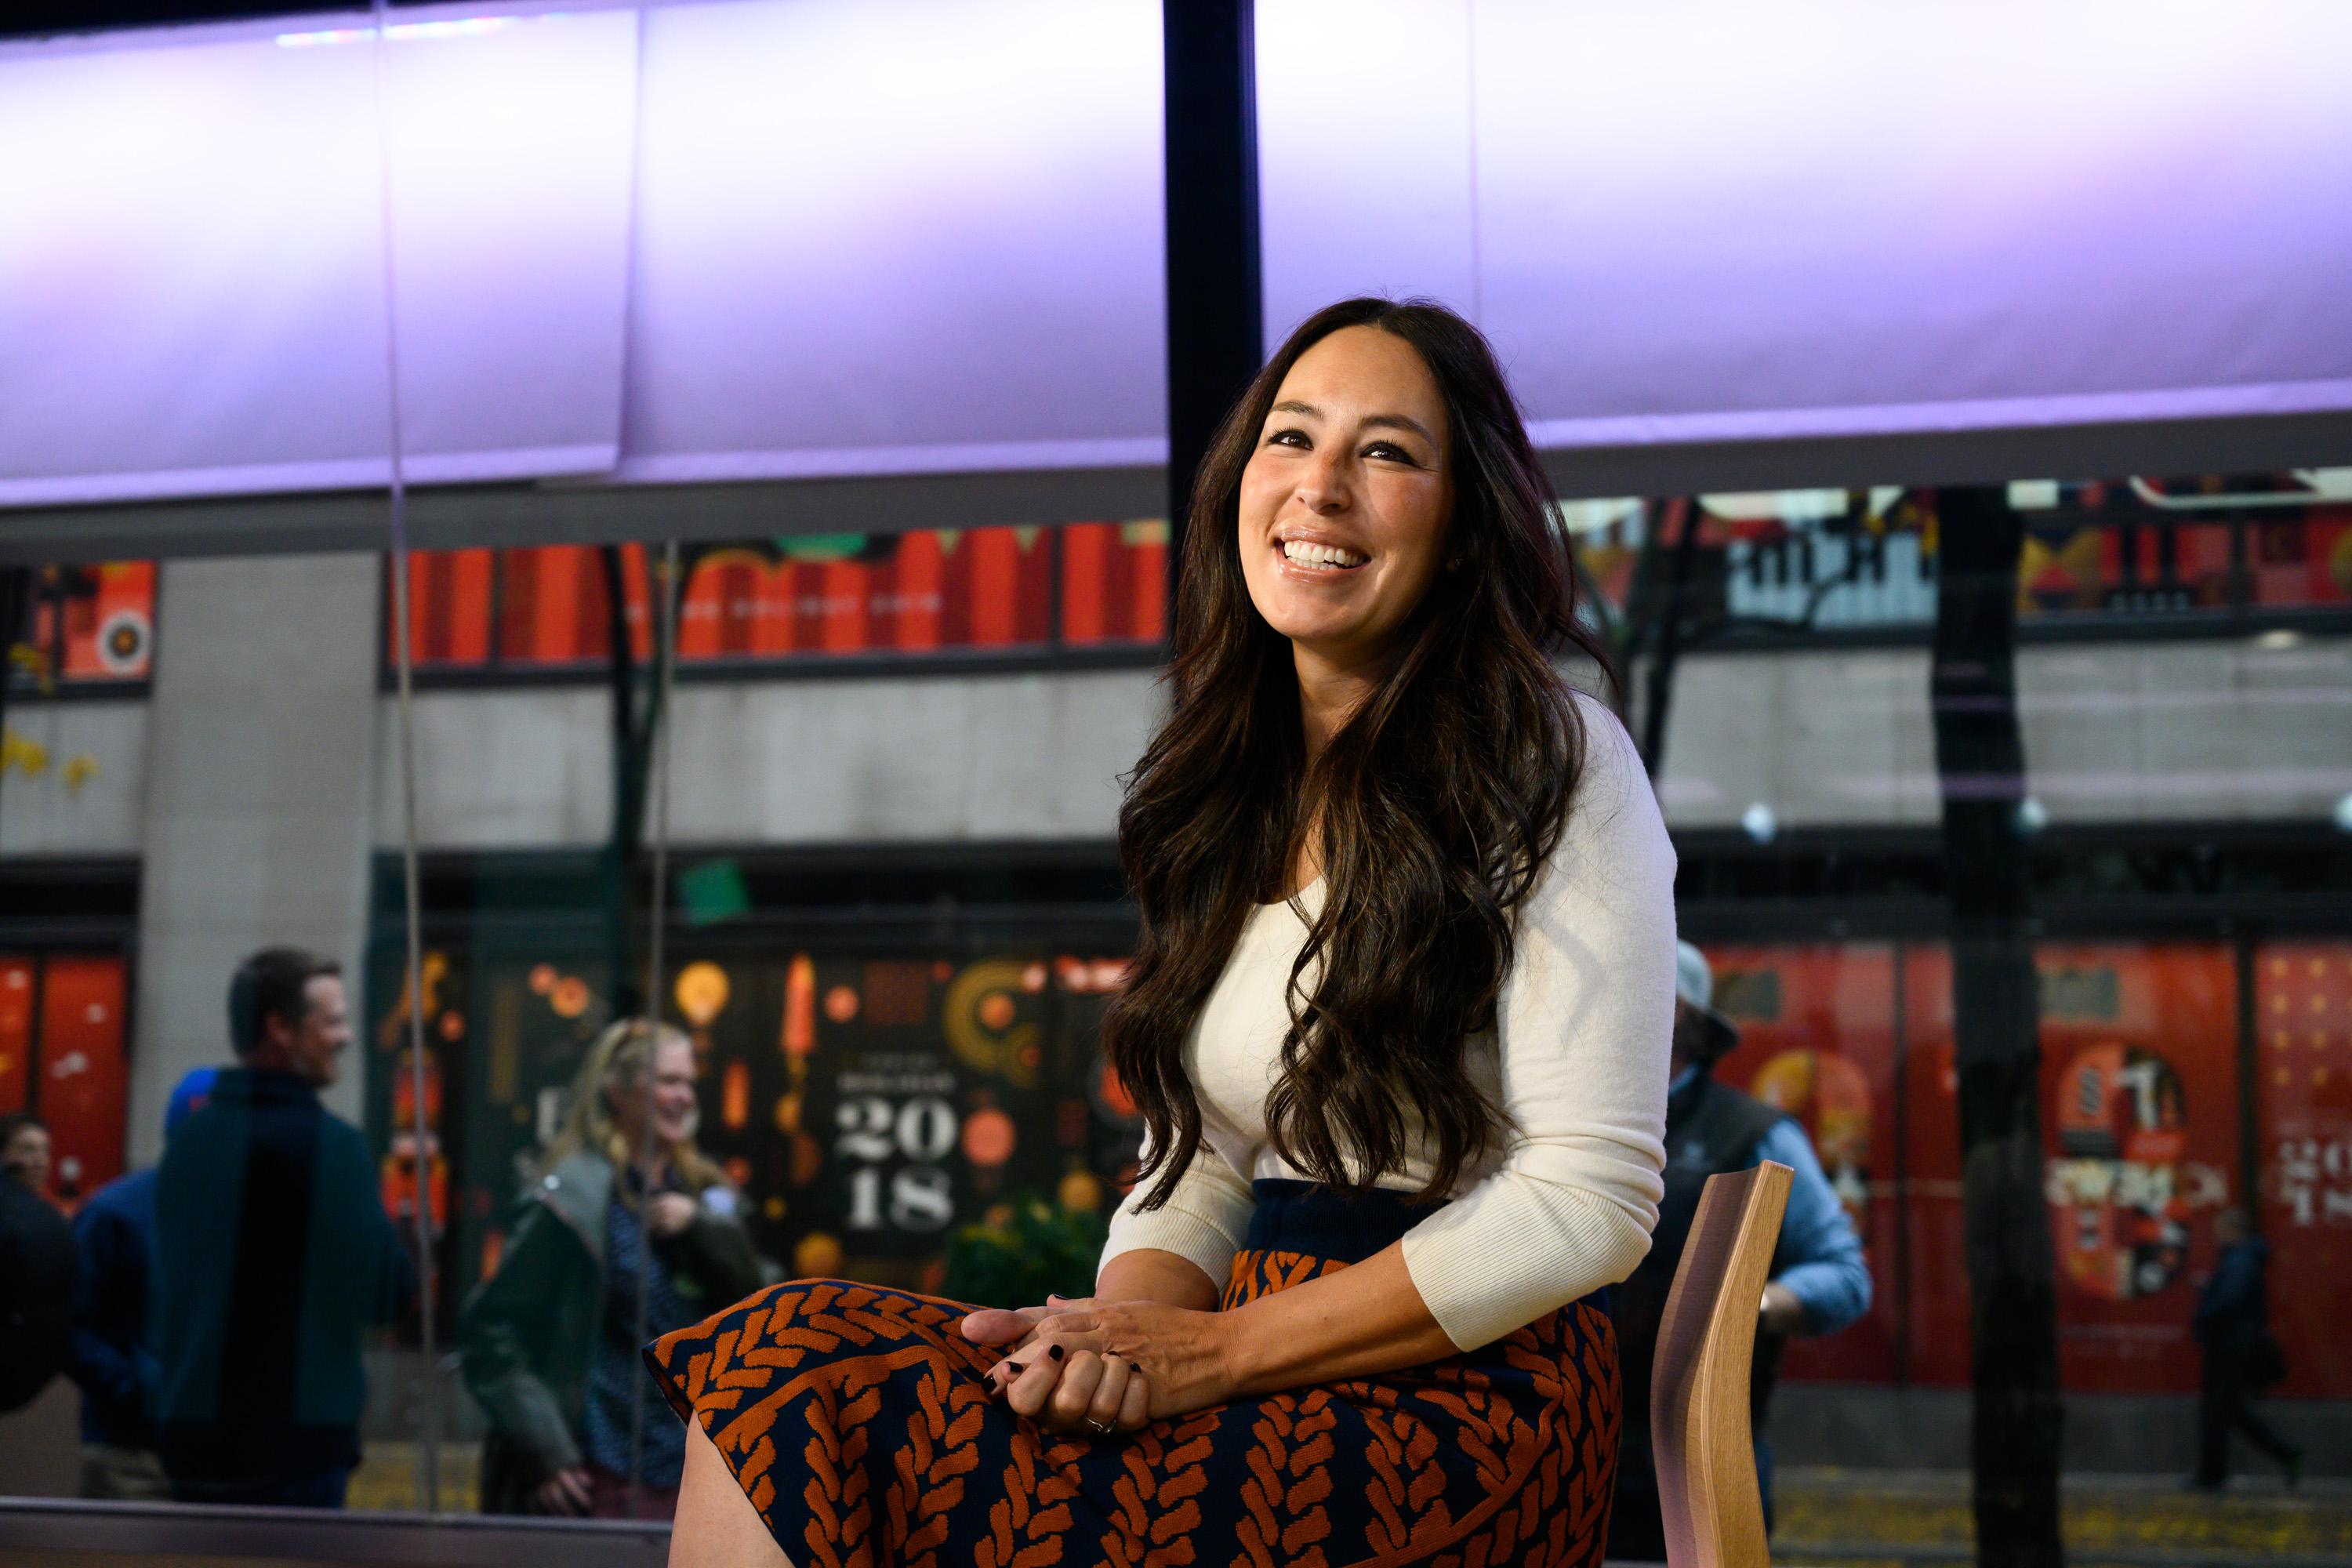 Joanna Gaines appears on the 'Today' show 